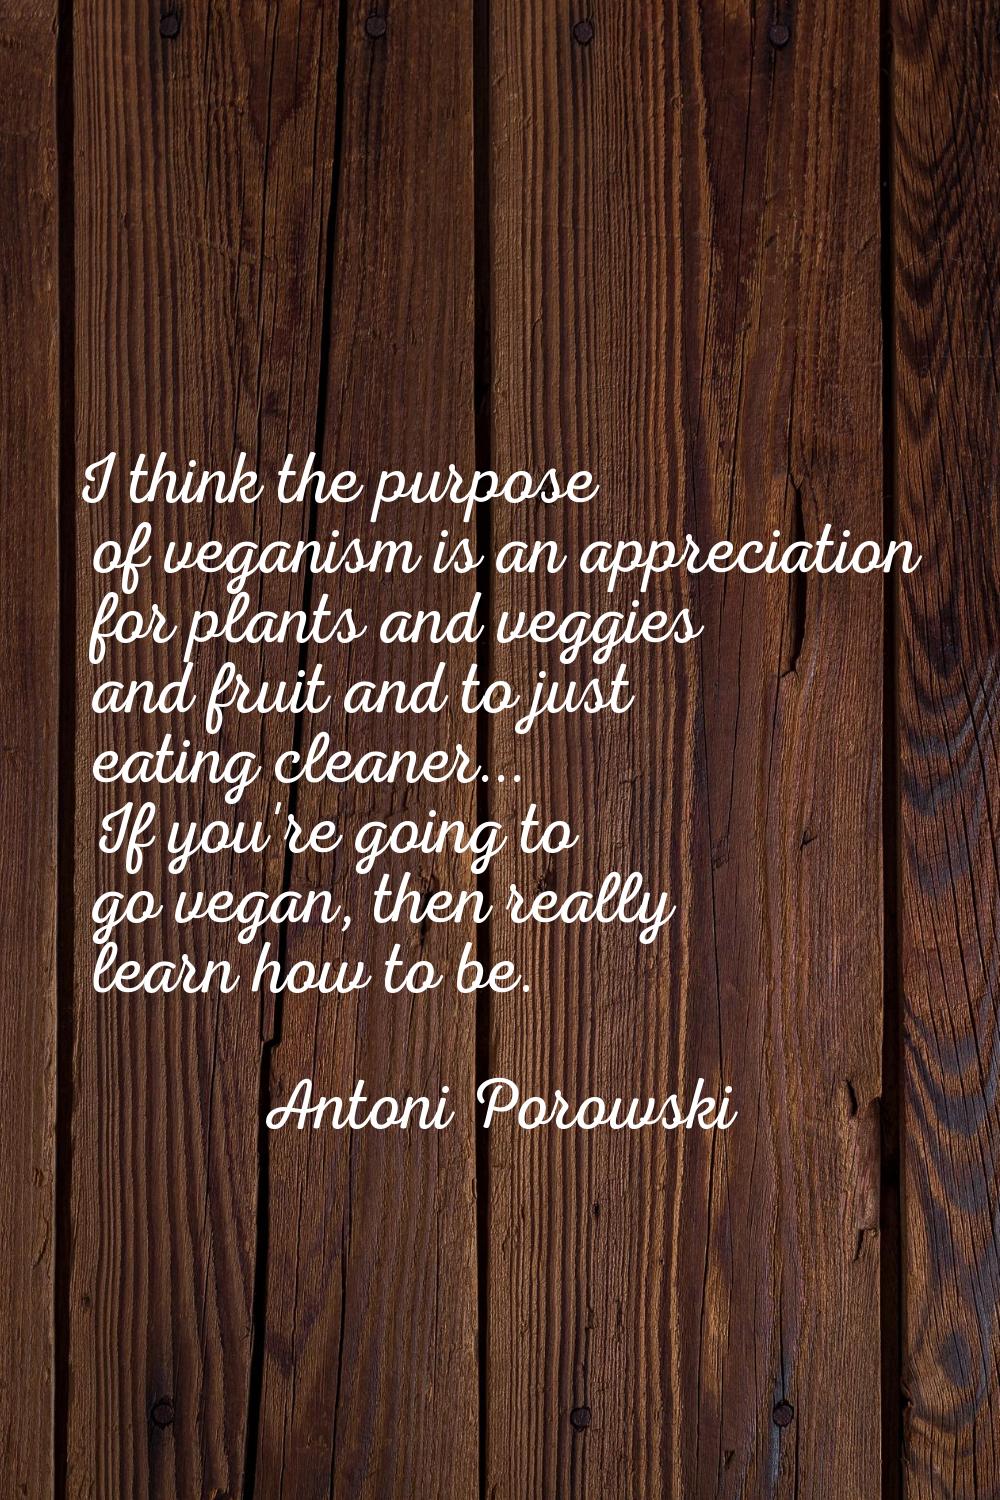 I think the purpose of veganism is an appreciation for plants and veggies and fruit and to just eat